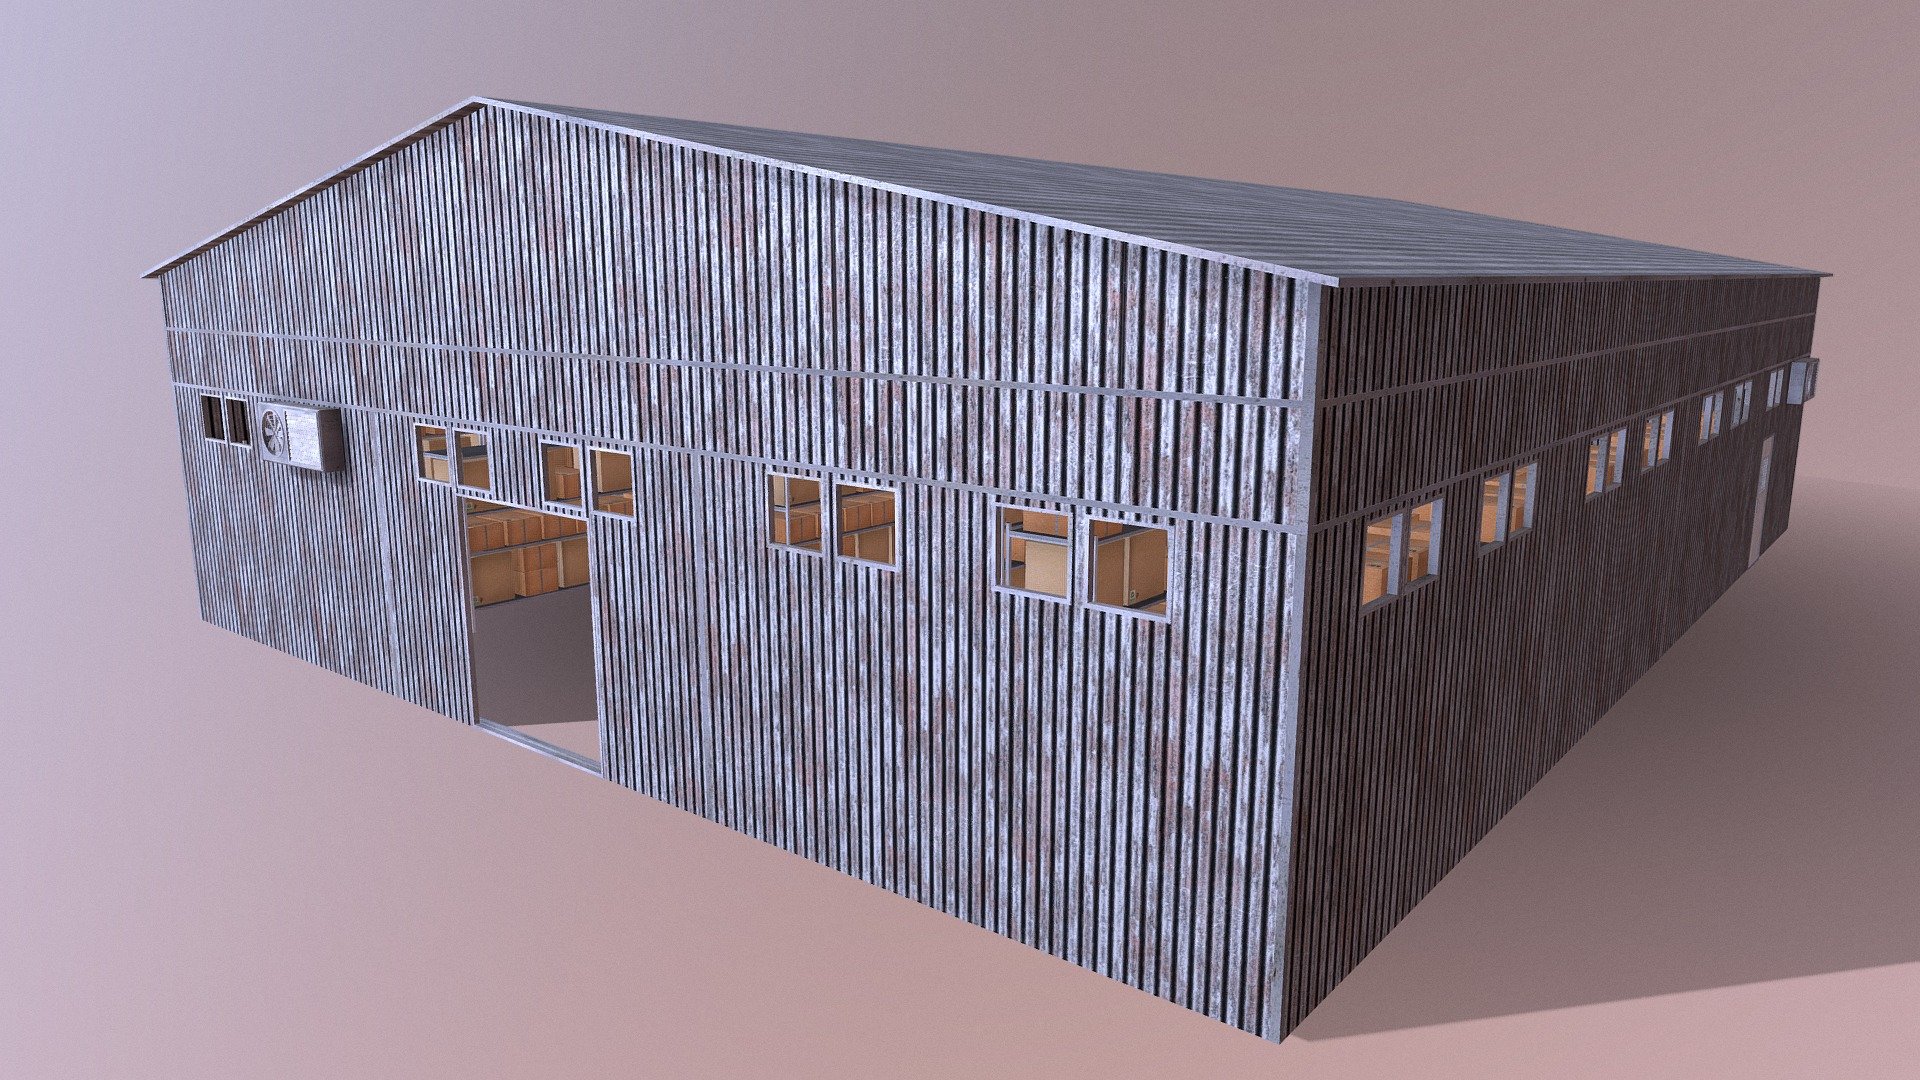 An industrial style warehouse with modeled interior and exterior.

Contains a warehouse ,movable doors ,an interior room ,shelving ,boxes and exterior air conditioning units. All props included are modeled separately so you can use and place them however you want. The Warehouse doors have pivot points for easy rotation and animation. Works great for any modern game engine or for rendering purposes. For exterior and interior use.

Available in: dae ,blend ,fbx ,3ds ,obj ,mtl.

Native Materials in Blender 2.79 with packed textures.


Textures for the warehouse are in 4096x4096 resolution
Textures for the doors are in 2048x2048 resolution
Textures for the boxes and shelves are in 1024x1024 resolution

Textures include:


Diffuse
Normal map
Ambient Occlusion

For any help or inquiries please message me directly on Sketchfab or on my email: howardcoates95@gmail.com - Warehouse - Buy Royalty Free 3D model by HowardCoates 3d model